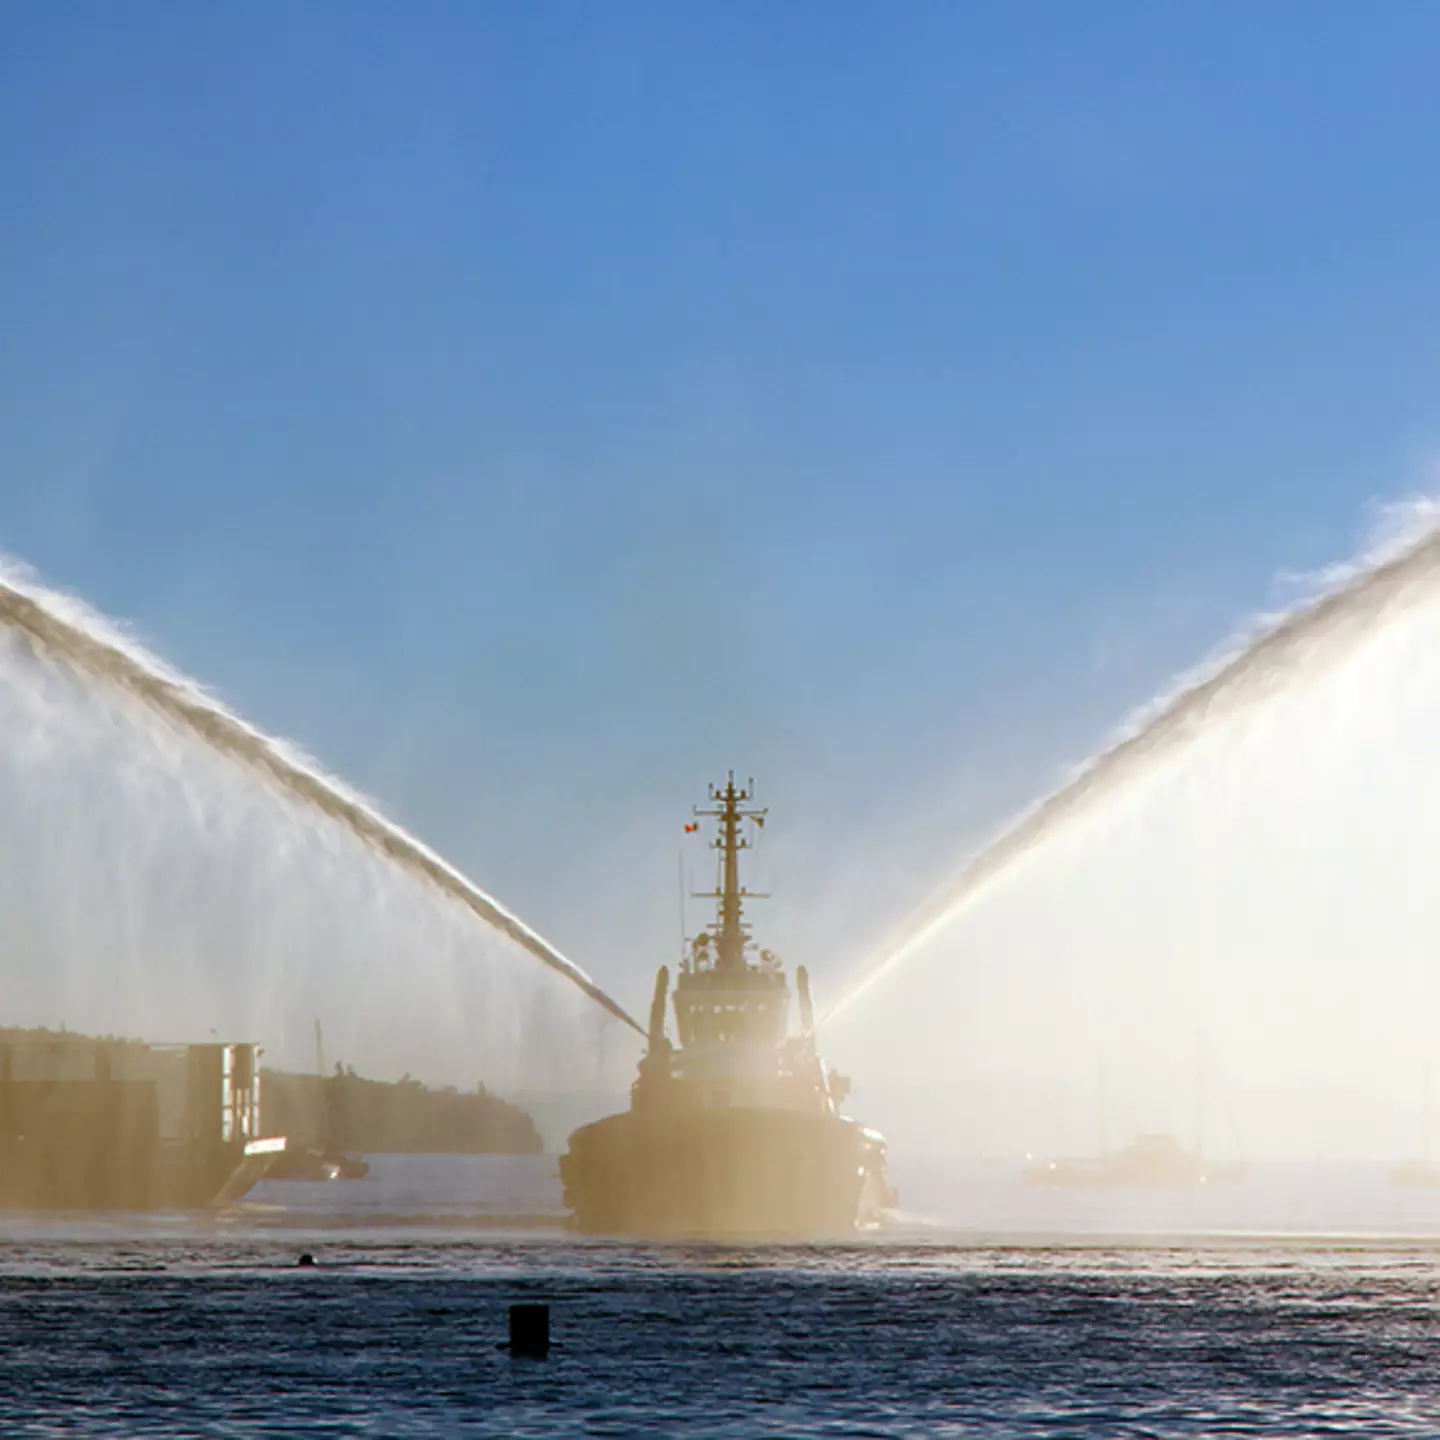 People shocked after finding out why tug boats spray water into the air when towing ship